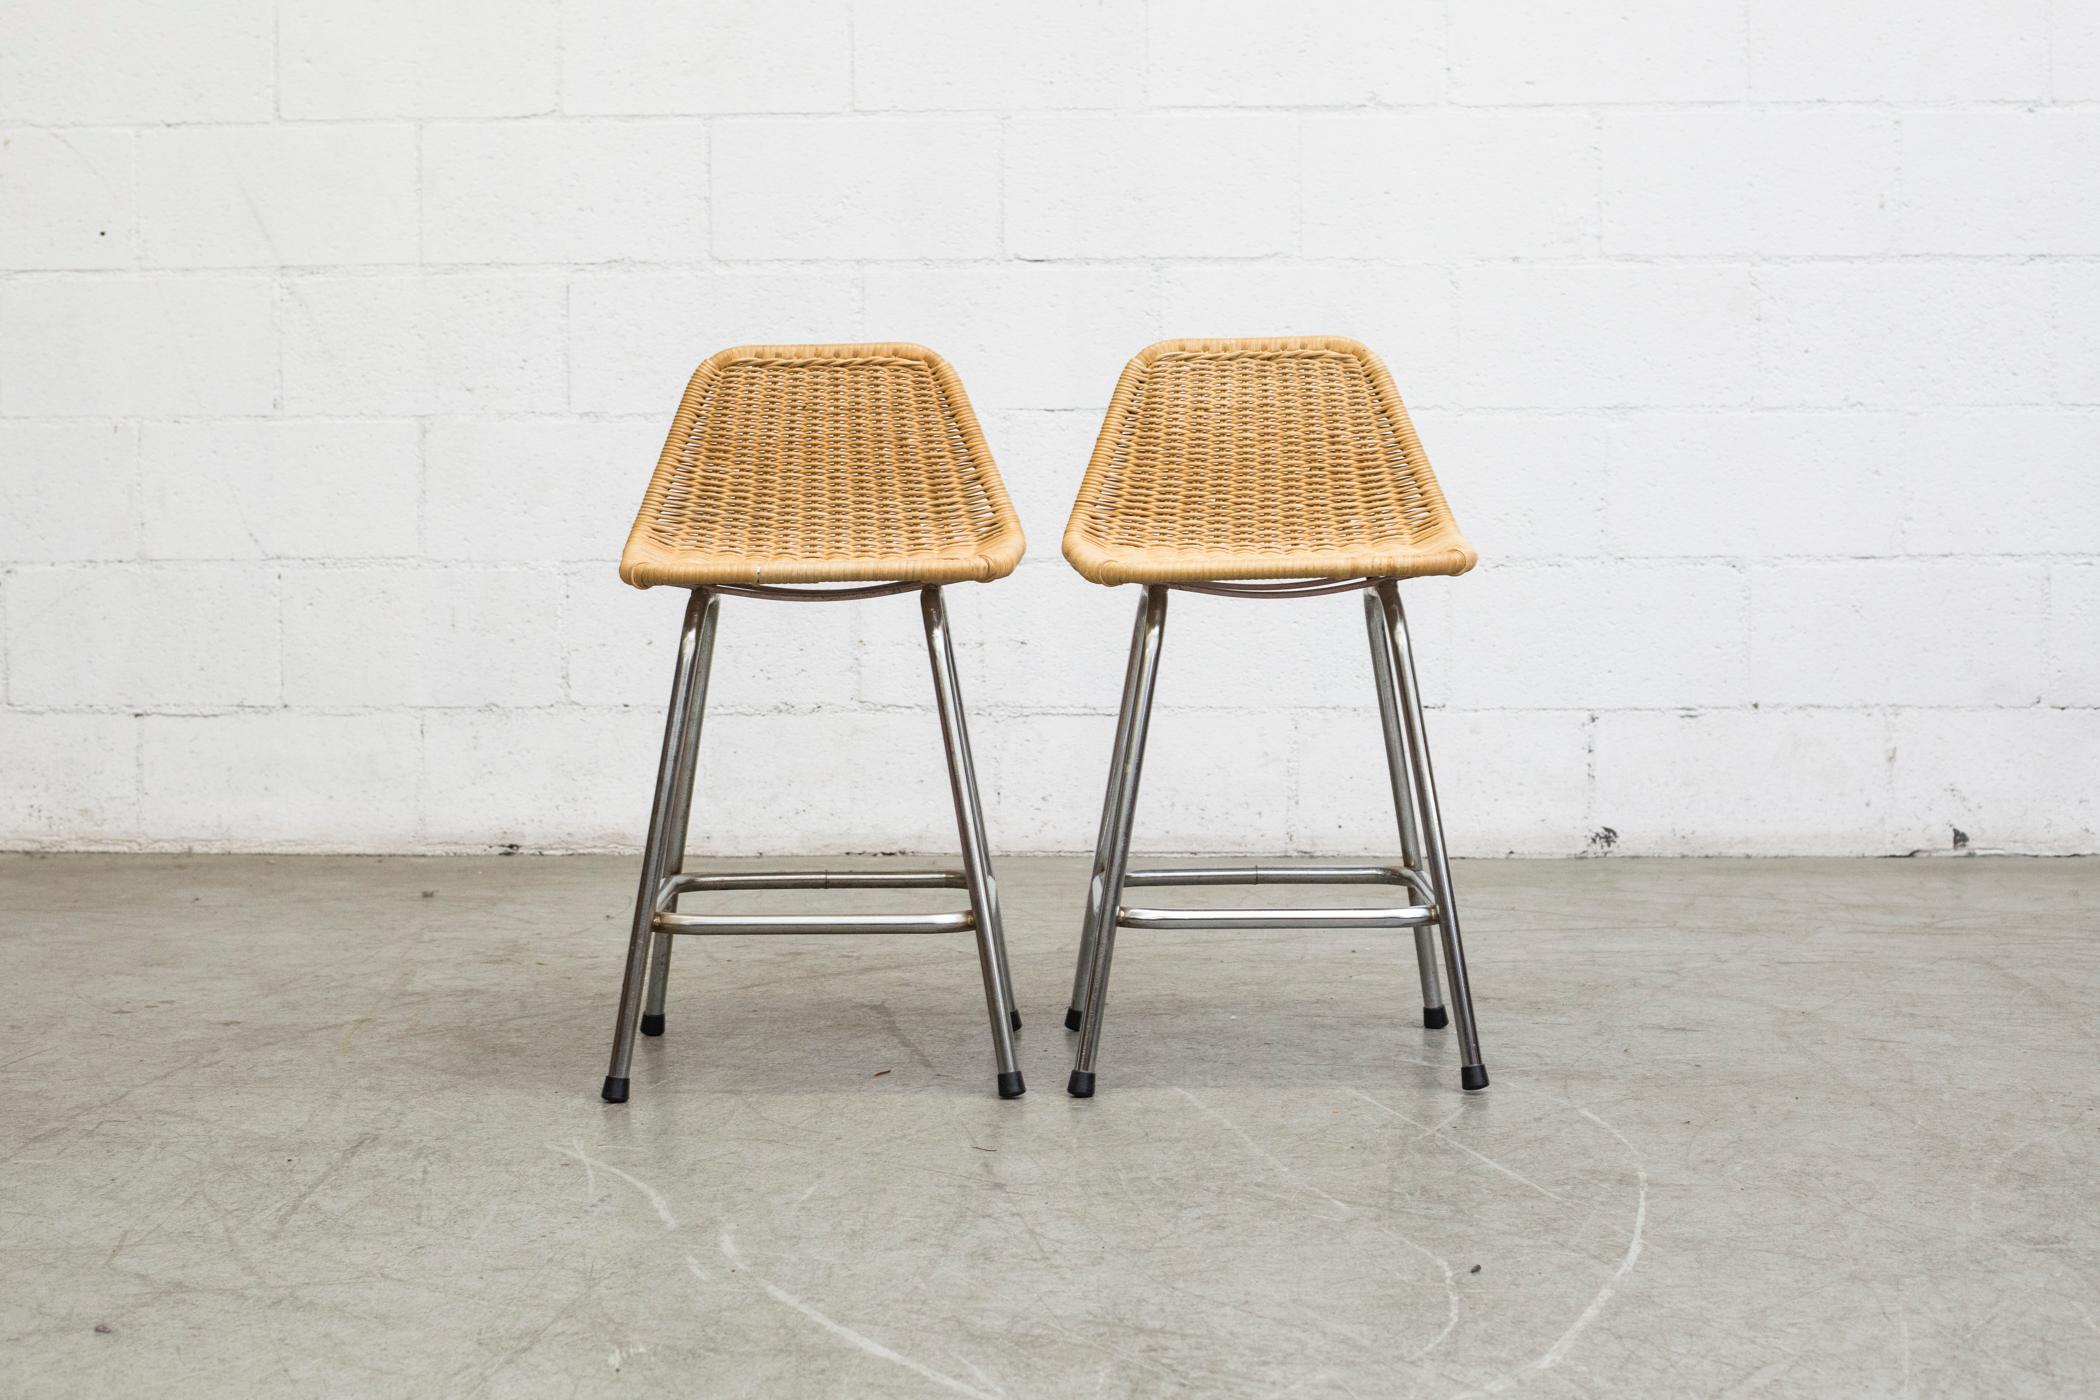 Charlotte Perriand inspired Wicker and chrome metal Counter stools with angled seat back by Dirk van Sliedregt for Rohe Noordwolde. The stools are slightly different in size and patina. In original condition with visible wear consistent with age and